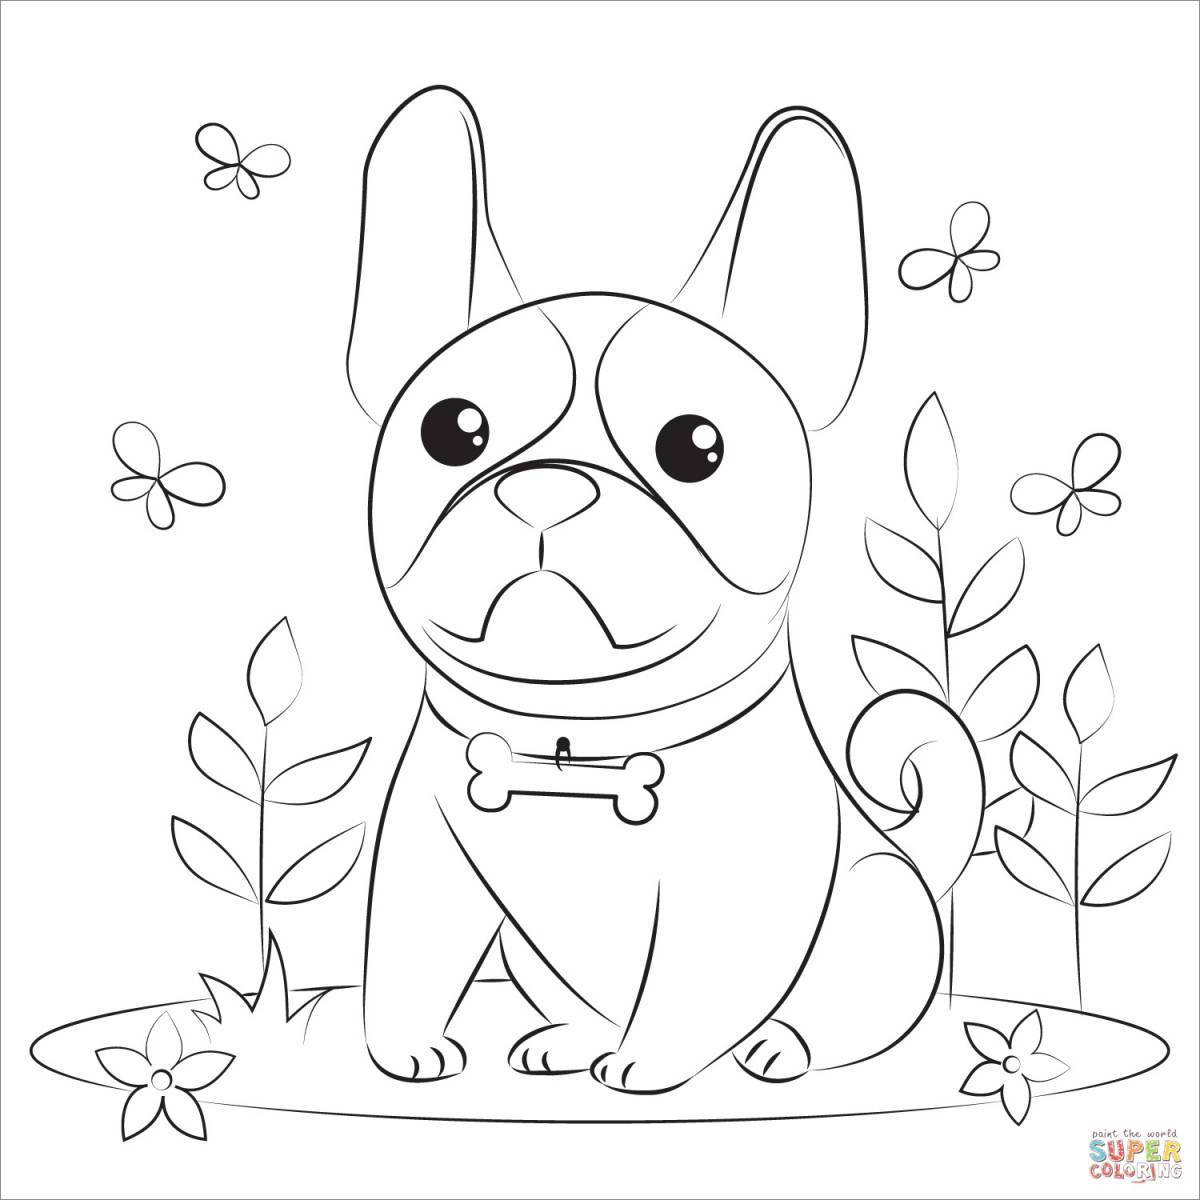 Violent french bulldog coloring page